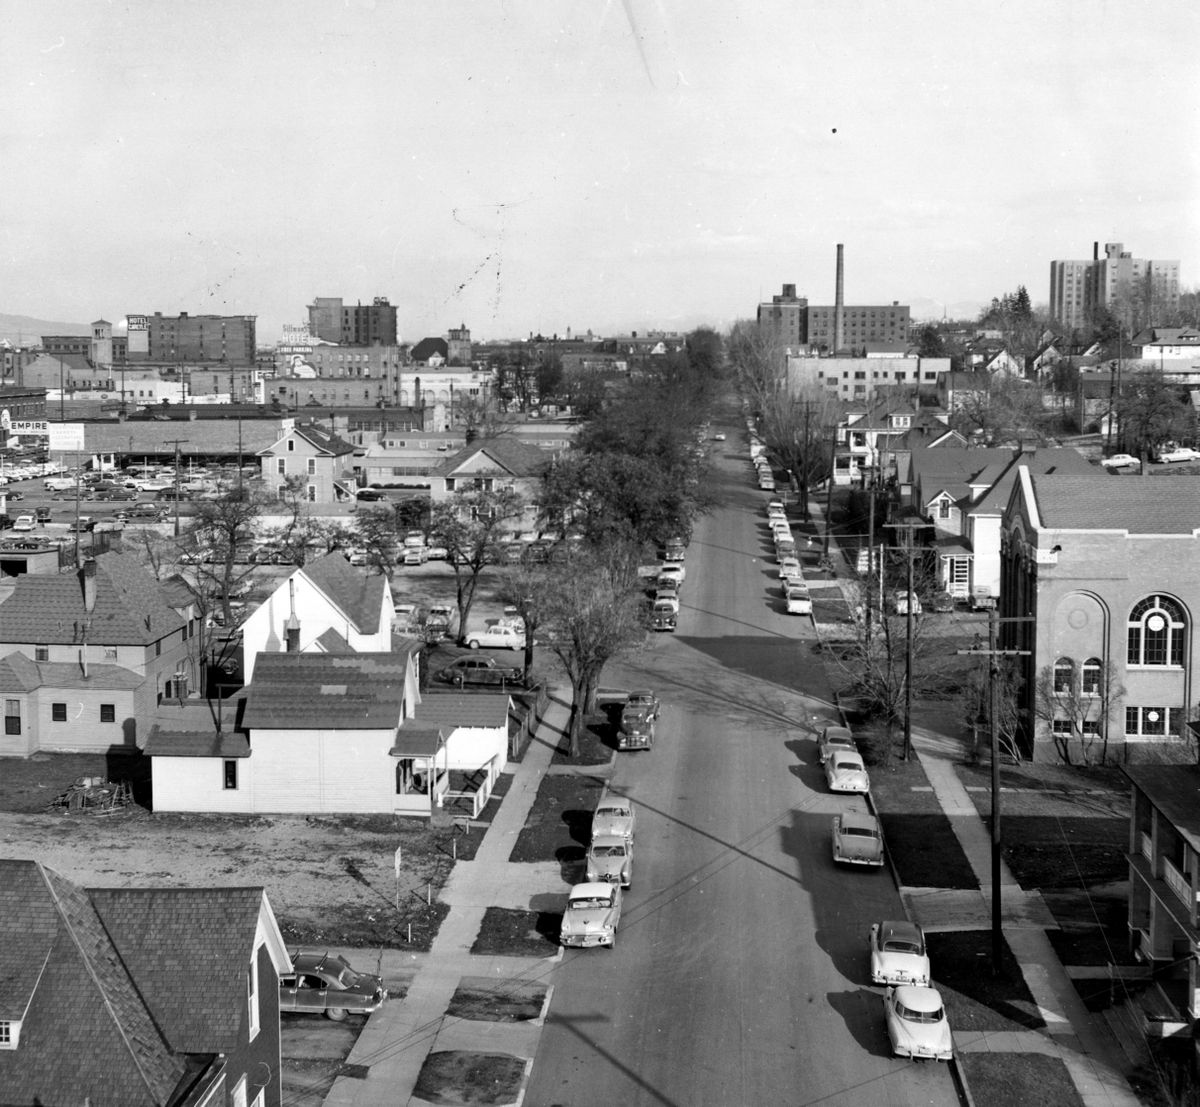 March 21, 1958: Looking east down Fourth Avenue from Cedar Street in Spokane. The house of worship on the right is Keneseth Israel Synagogue.